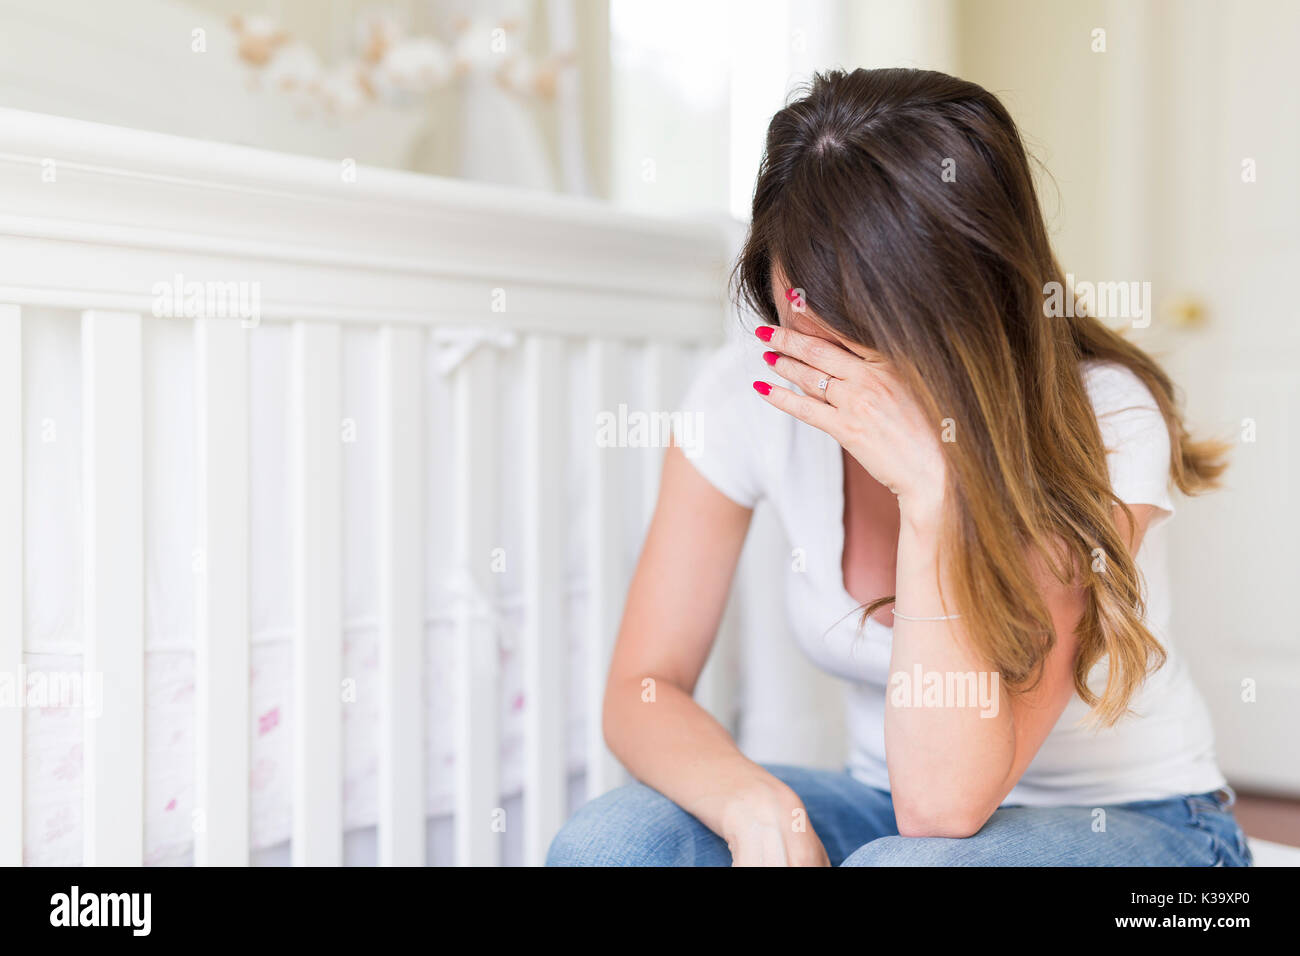 Depressed young woman in baby room Stock Photo